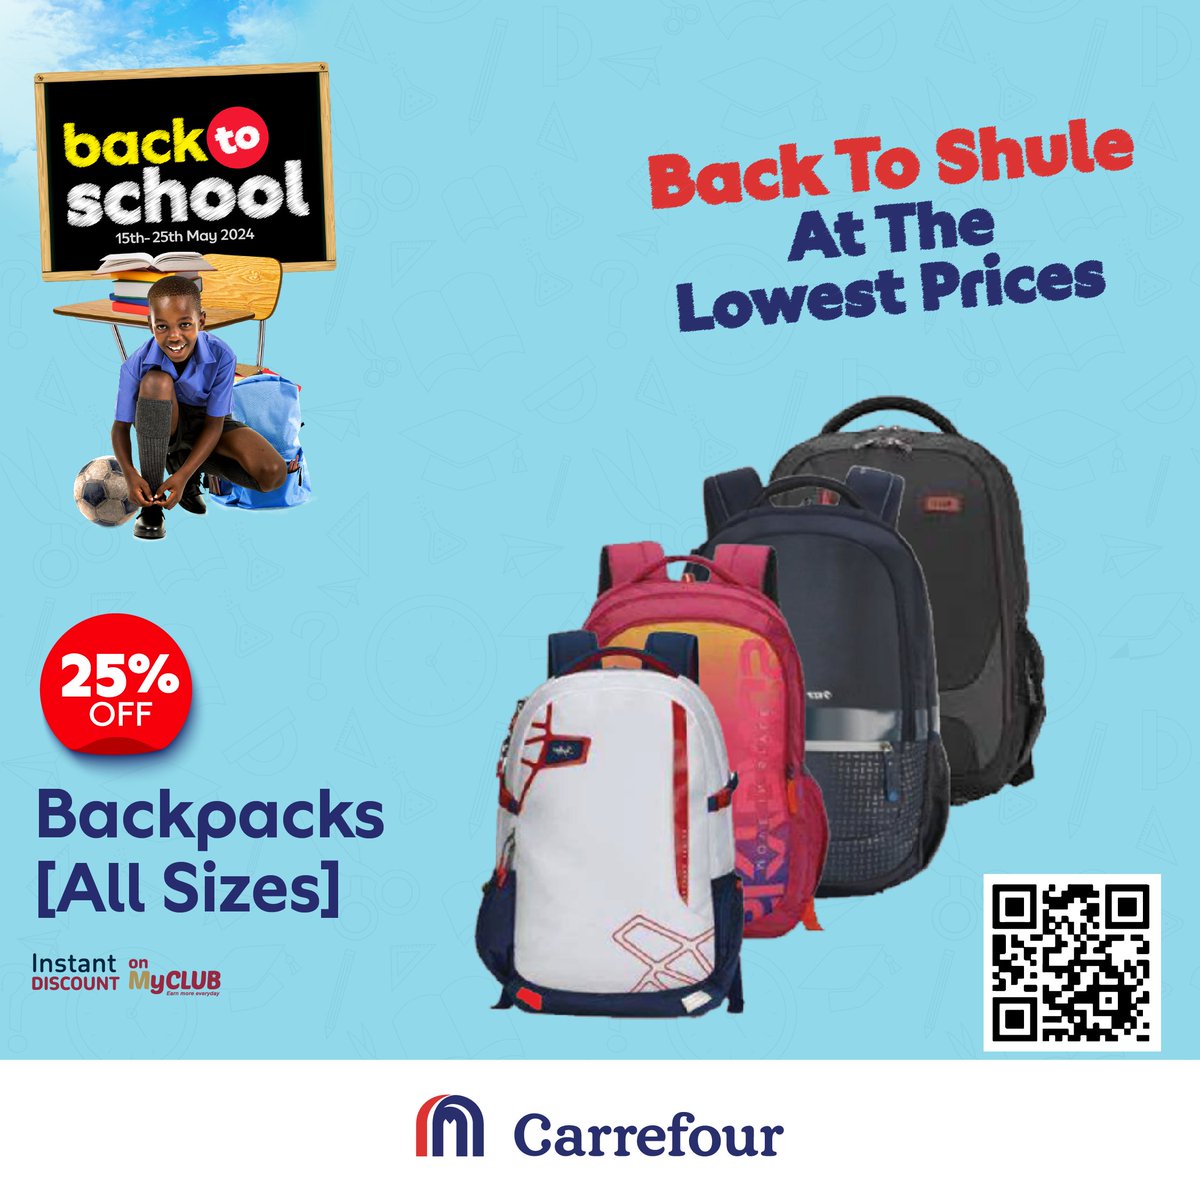 Get your child ready for school with our durable backpacks and suitcases, now offered at 25% and 50% discounts respectively. Head over to any of our supermarkets to bag these deals. #MoreForYou #GreatMoments @MajidAlFuttaim